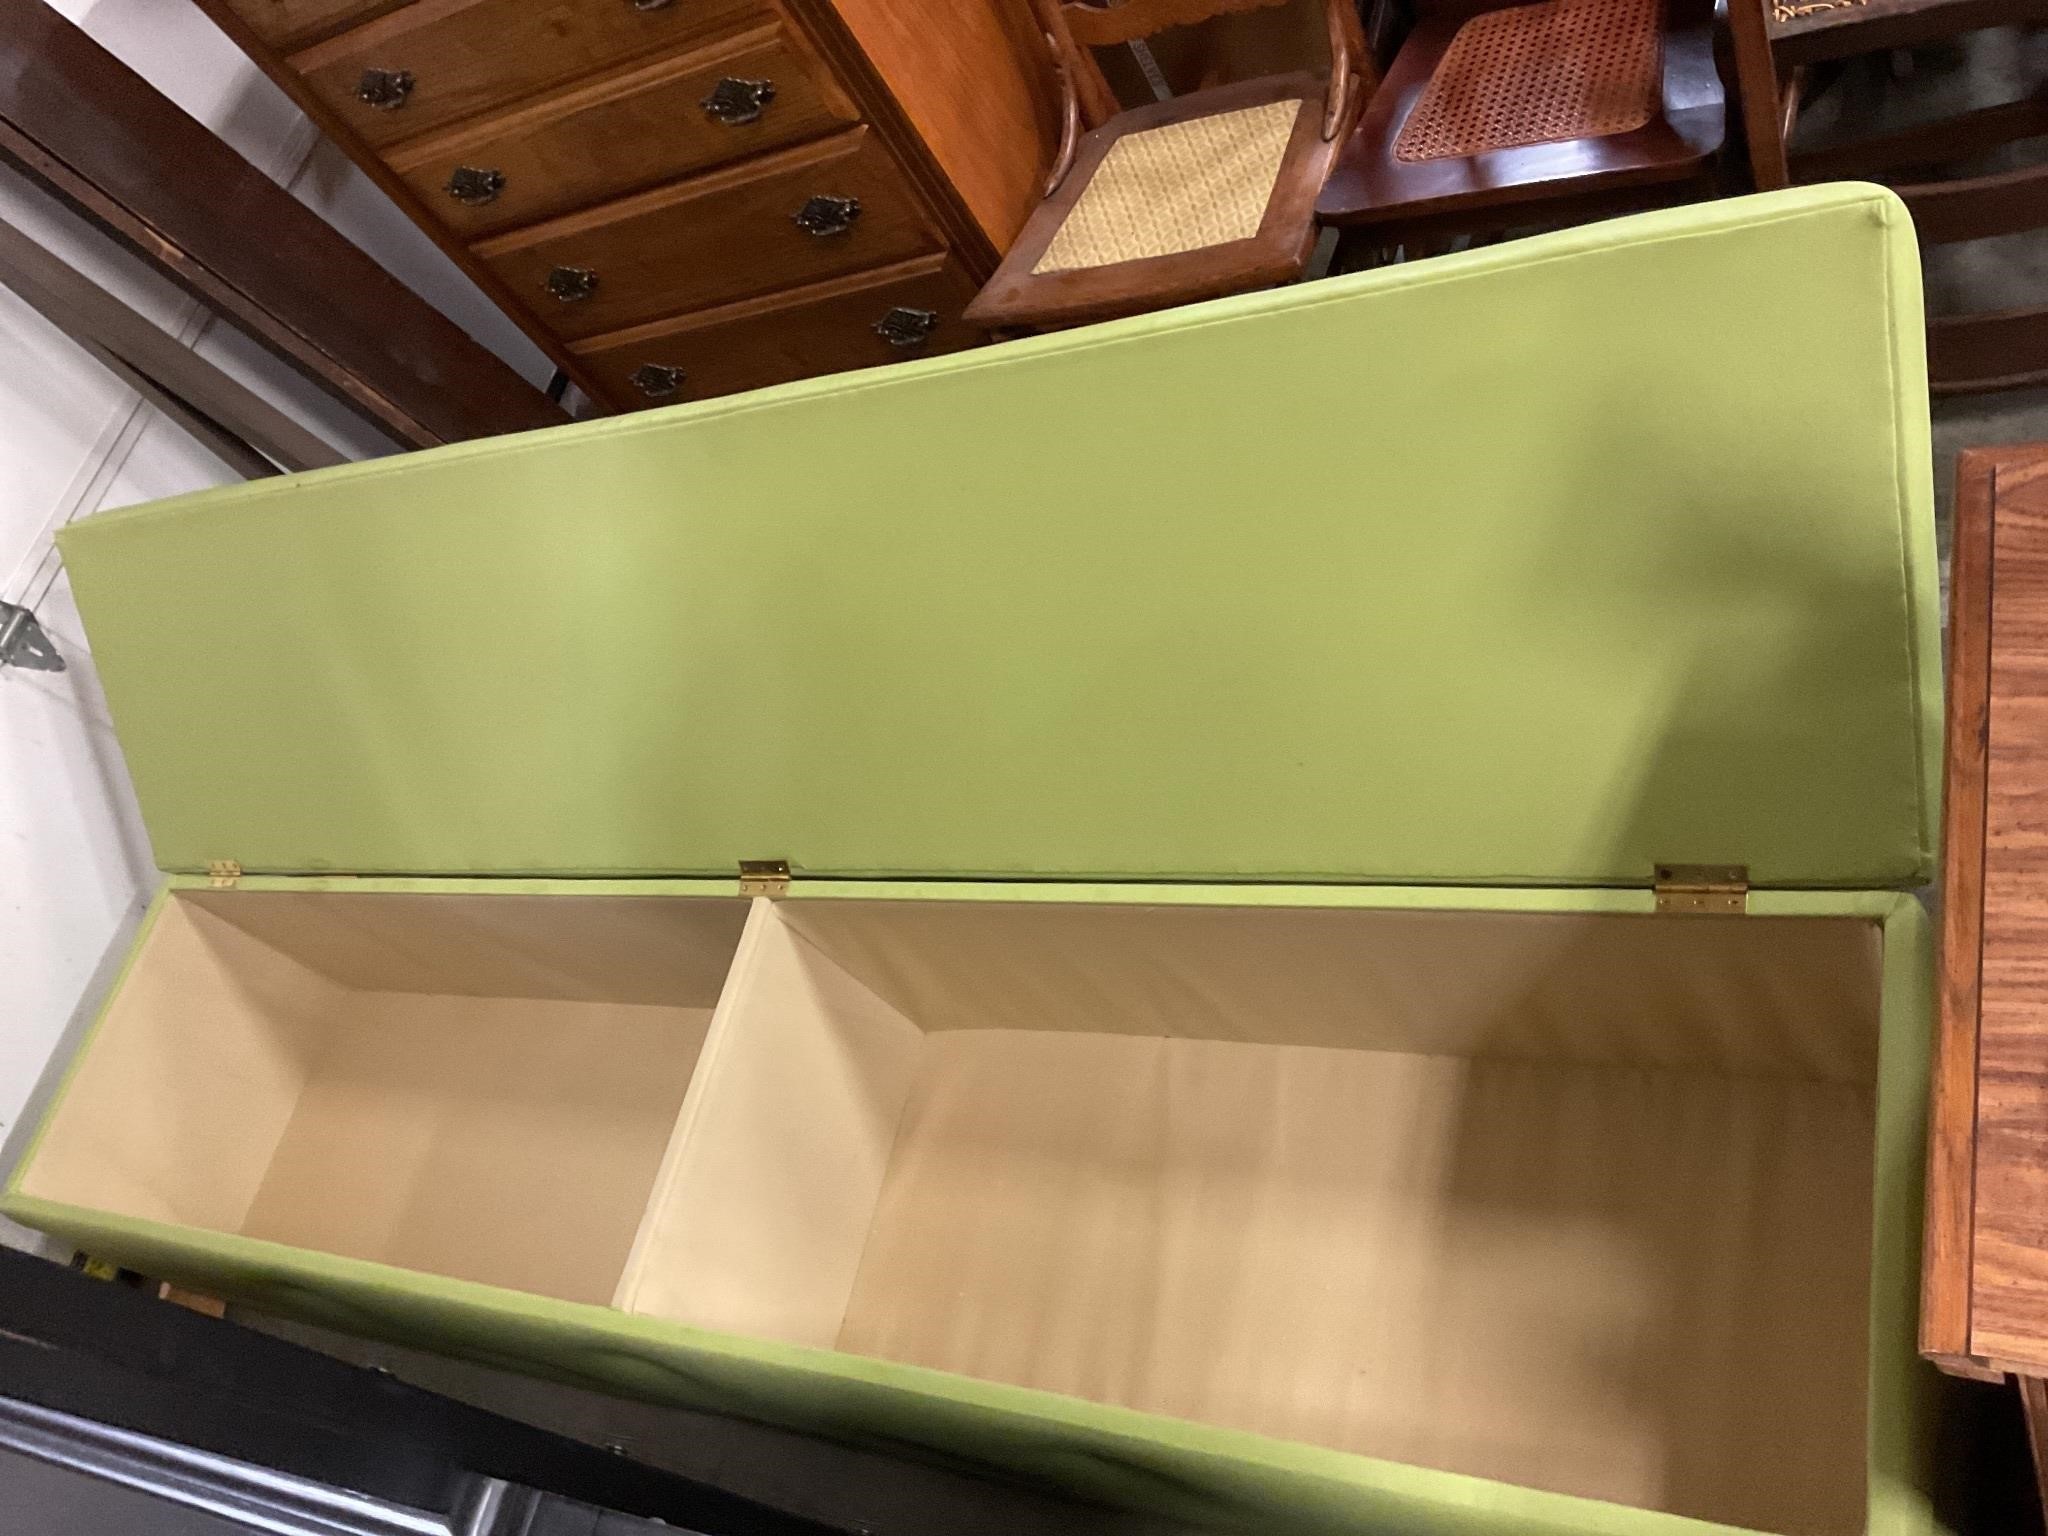 84” by 19” by 18.5” green bench with storage